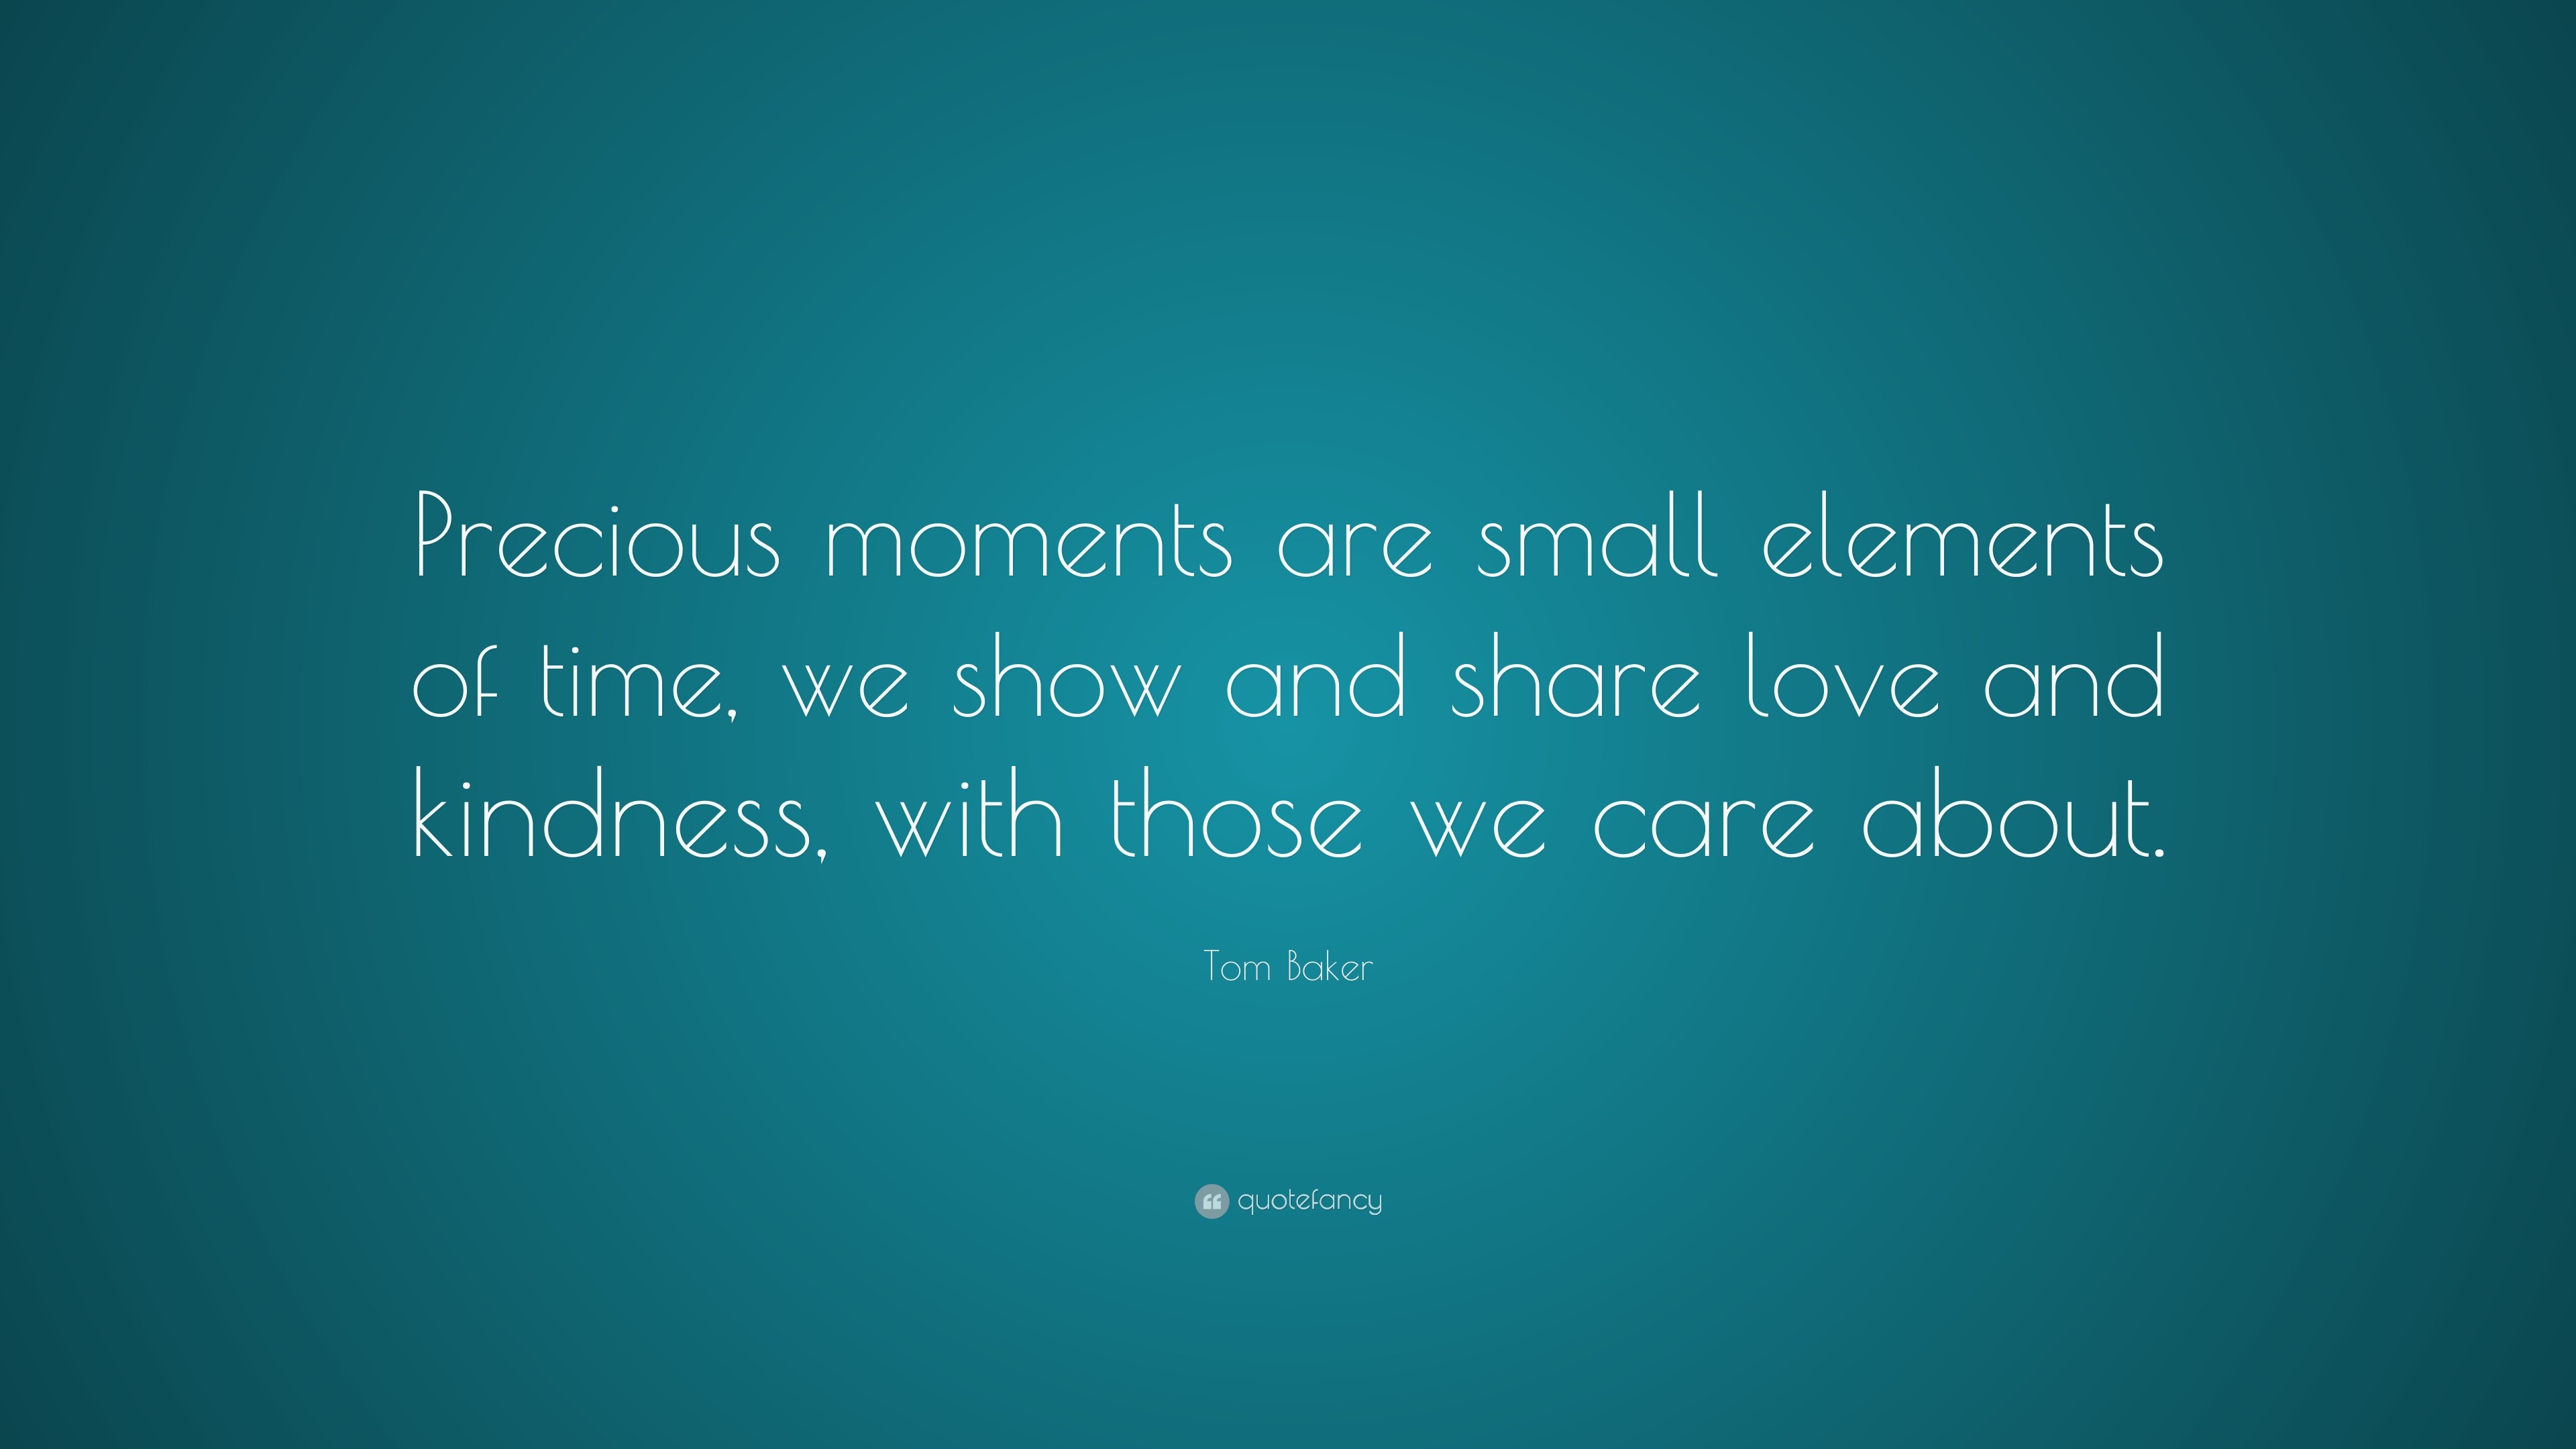 3840x2160 Tom Baker Quote: “Precious moments are small elements of time, we show and